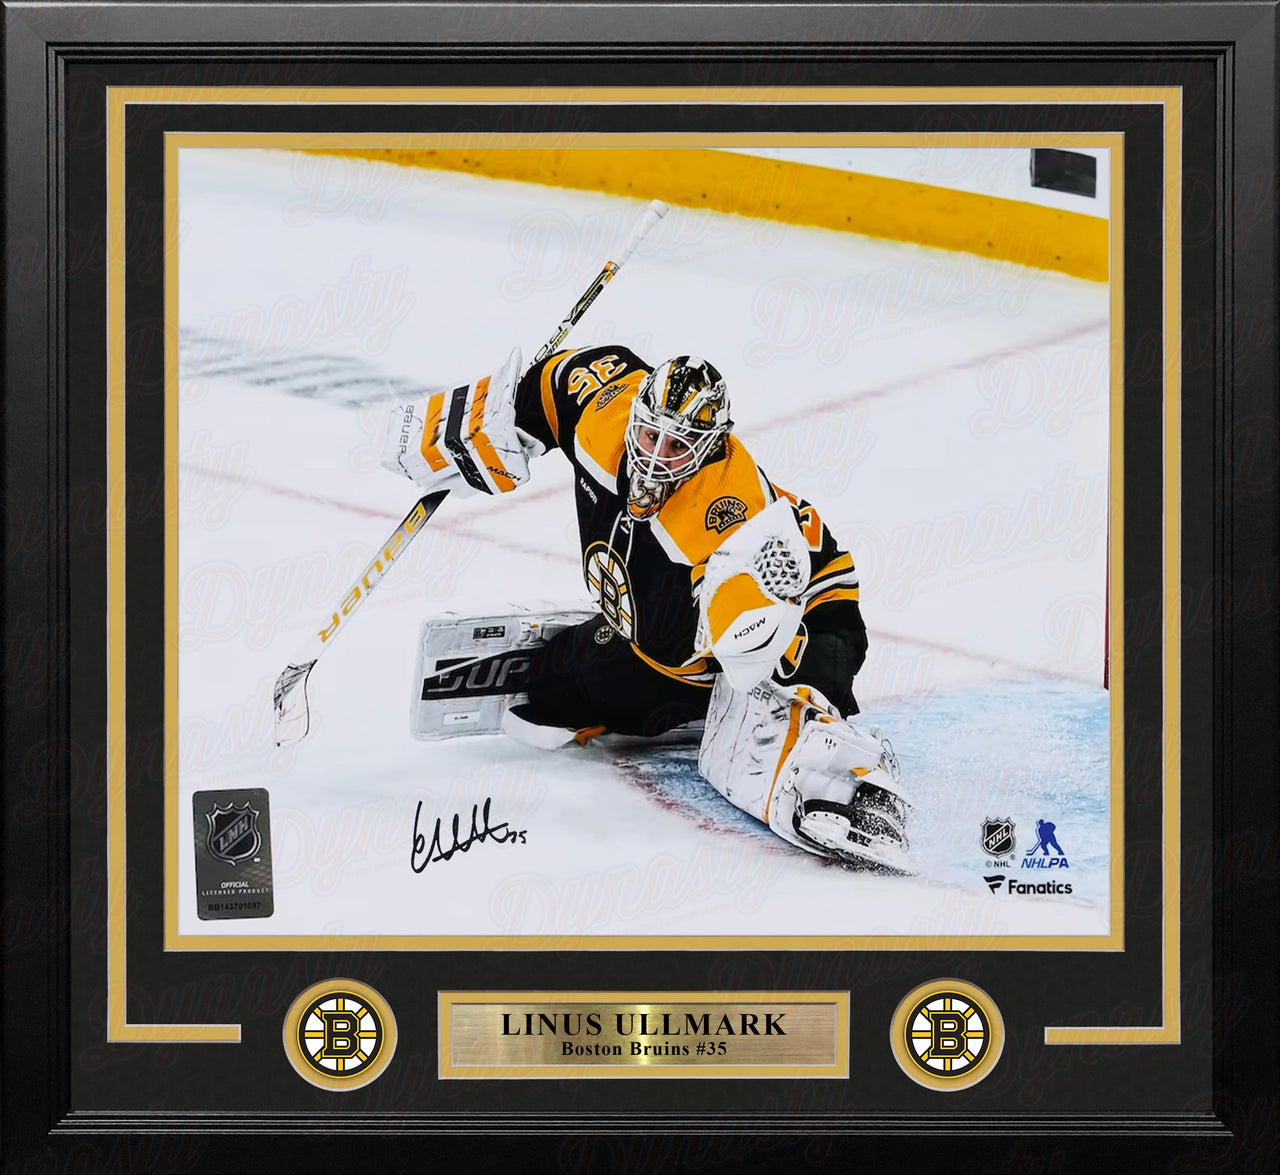 Linus Ullmark in Action Boston Bruins Autographed Framed Hockey Photo - Dynasty Sports & Framing 